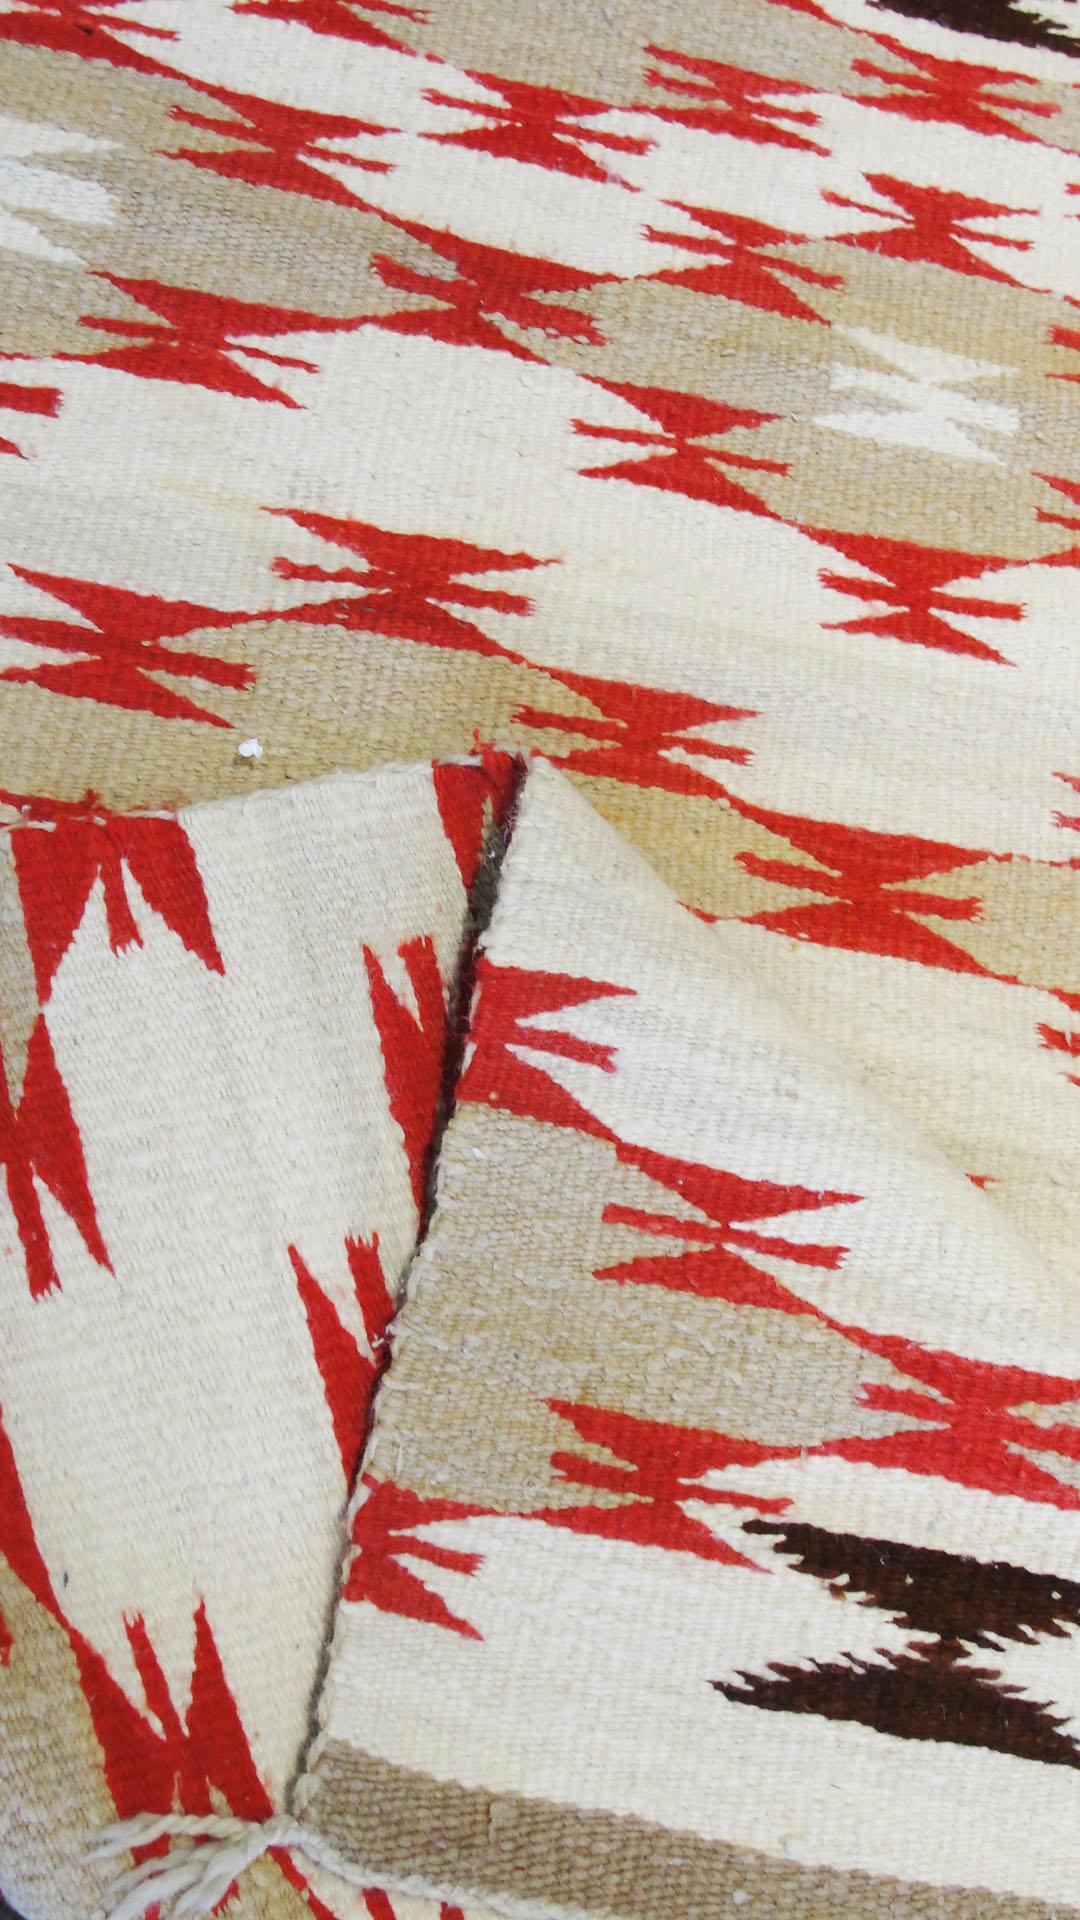 A typical Navajo rug has approximately 30 wefts to the linear inch. A two grey hills from Toadlena average about 45. The finer pieces frequently have upwards of 80. When a textile has 80 or more wefts per inch, it is considered a tapestry, not a